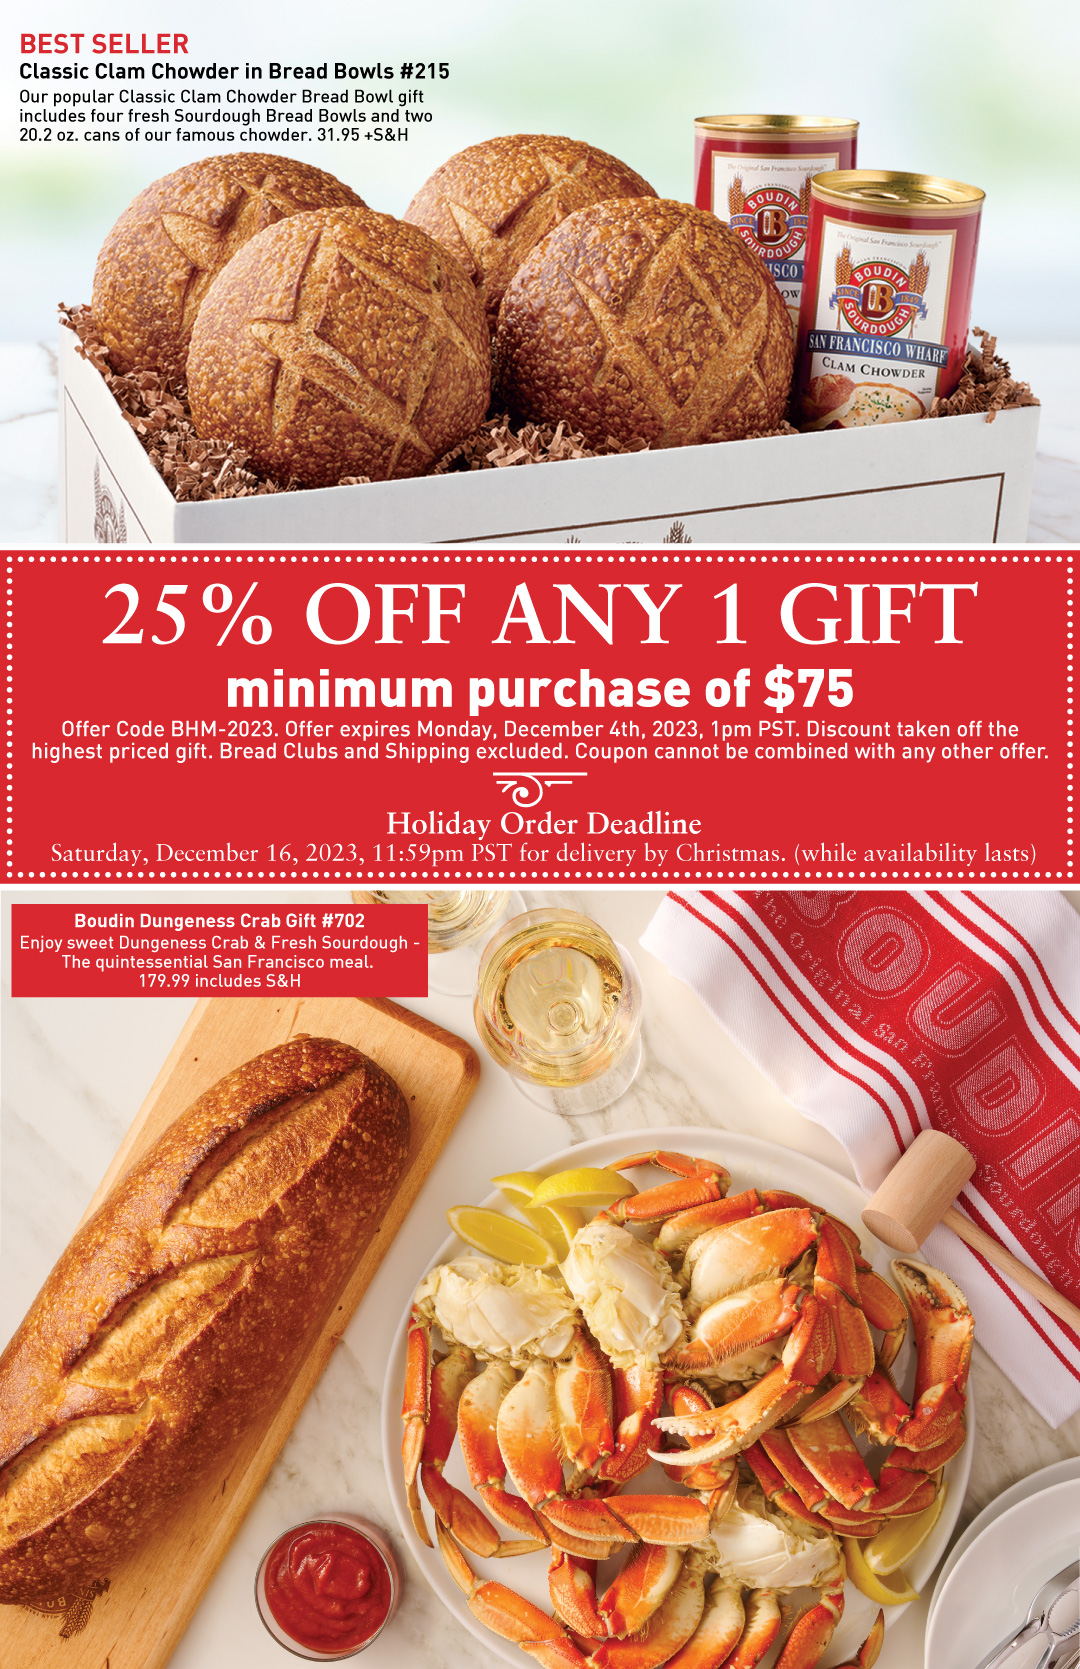 Classic Clam Chowder in Bread Bowls #215 with sourdough bread bowls and clam chowder in a box and priced at 31.95 +S&H. 25% OFF Any 1 Gift with minimum purchase of $75 with offer code BHM-2023. Offer expires Monday, December 4th, 2023, 1pm PST. Discount taken off the highest priced gift. Bread Clubs and Shipping excluded. Coupon cannot be combined with any other offer. Boudin Dungeness Crab Gift #702 with Sourdough Long Loaf and Crab on marble surface and priced at 179.99 includes S&H.